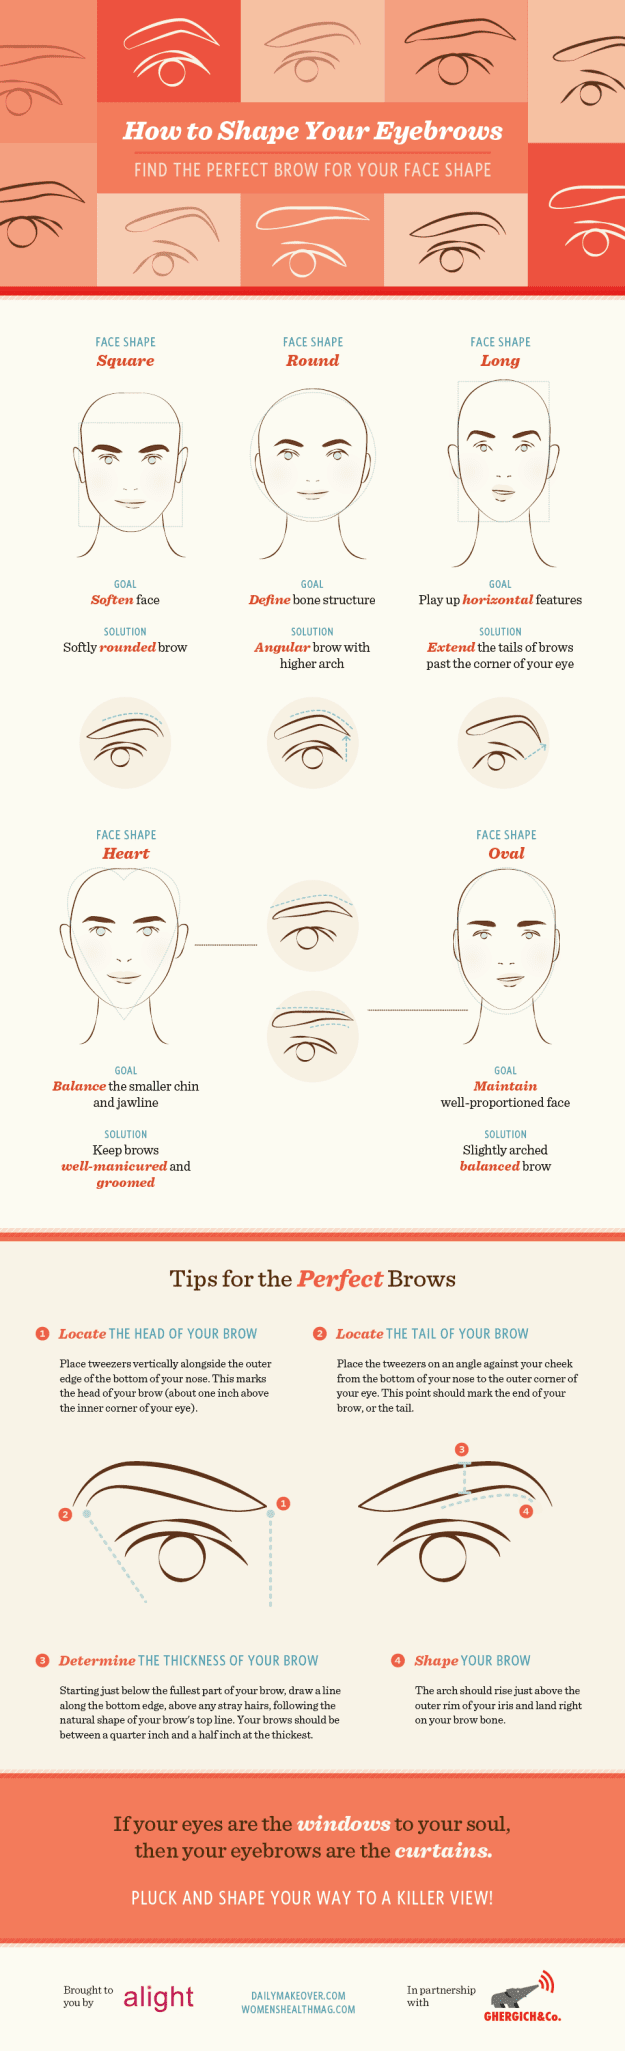 brows-head-tail-tips-for-perfect-brows